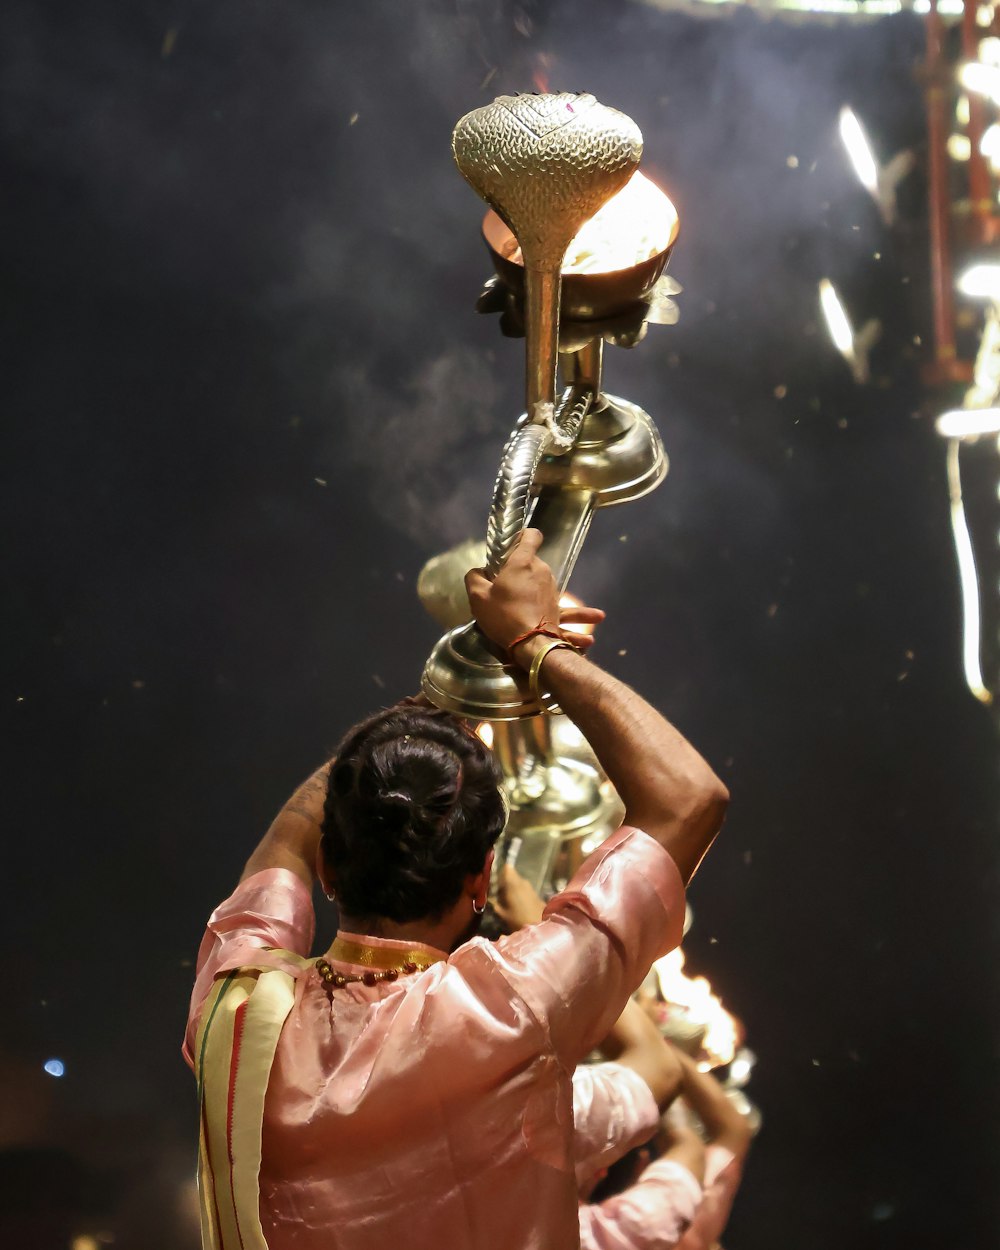 a man in a pink outfit holding a golden trophy